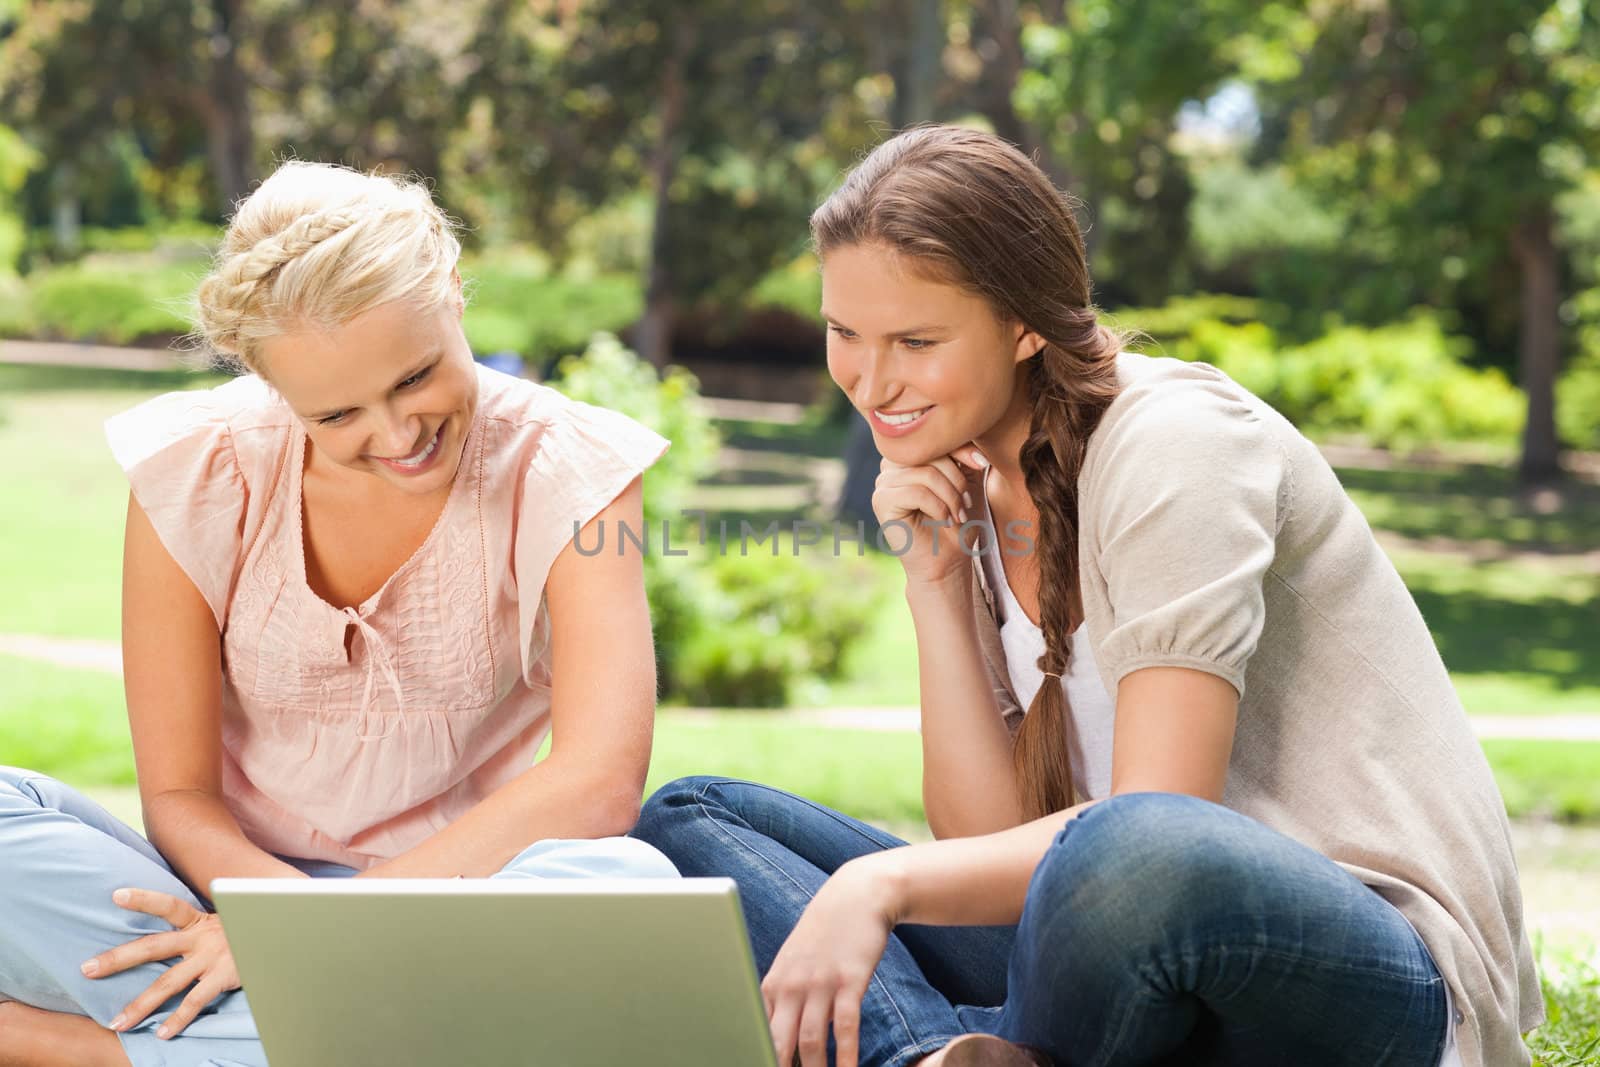 Smiling women in the park with a laptop by Wavebreakmedia